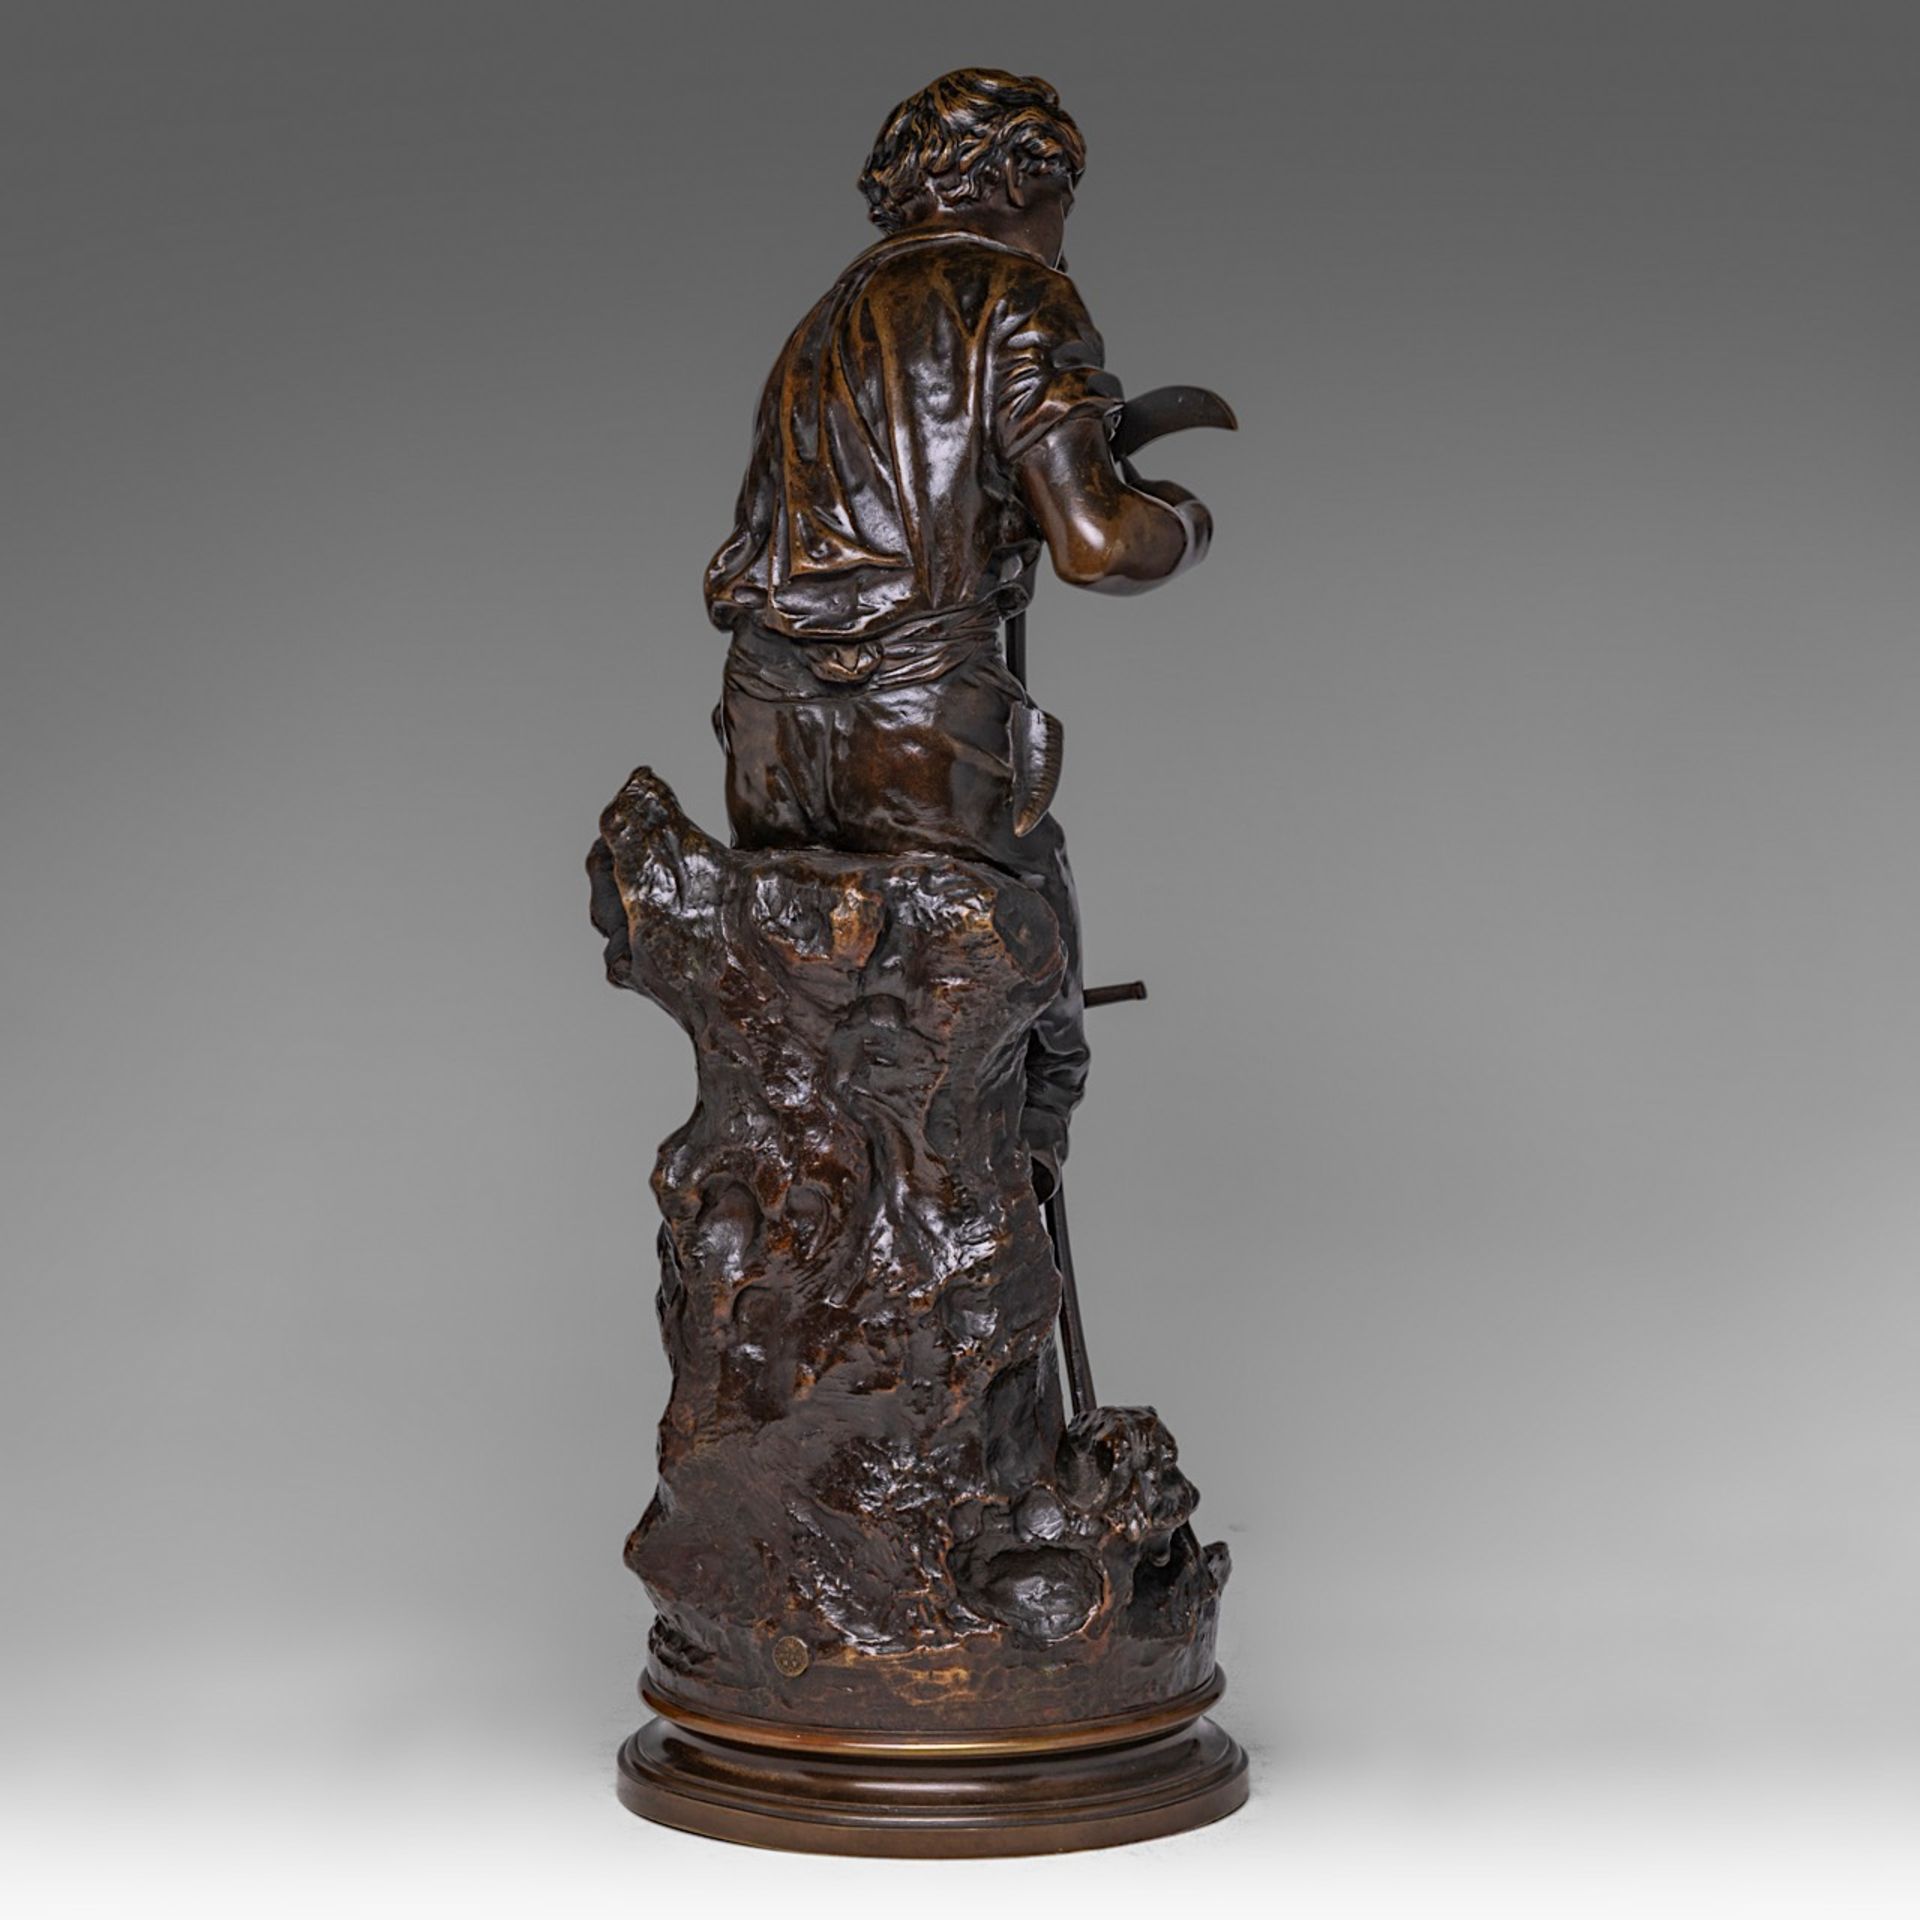 Mathurin Moreau (1822-1912), boy with scythe, patinated bronze, H 62 cm - Image 4 of 7